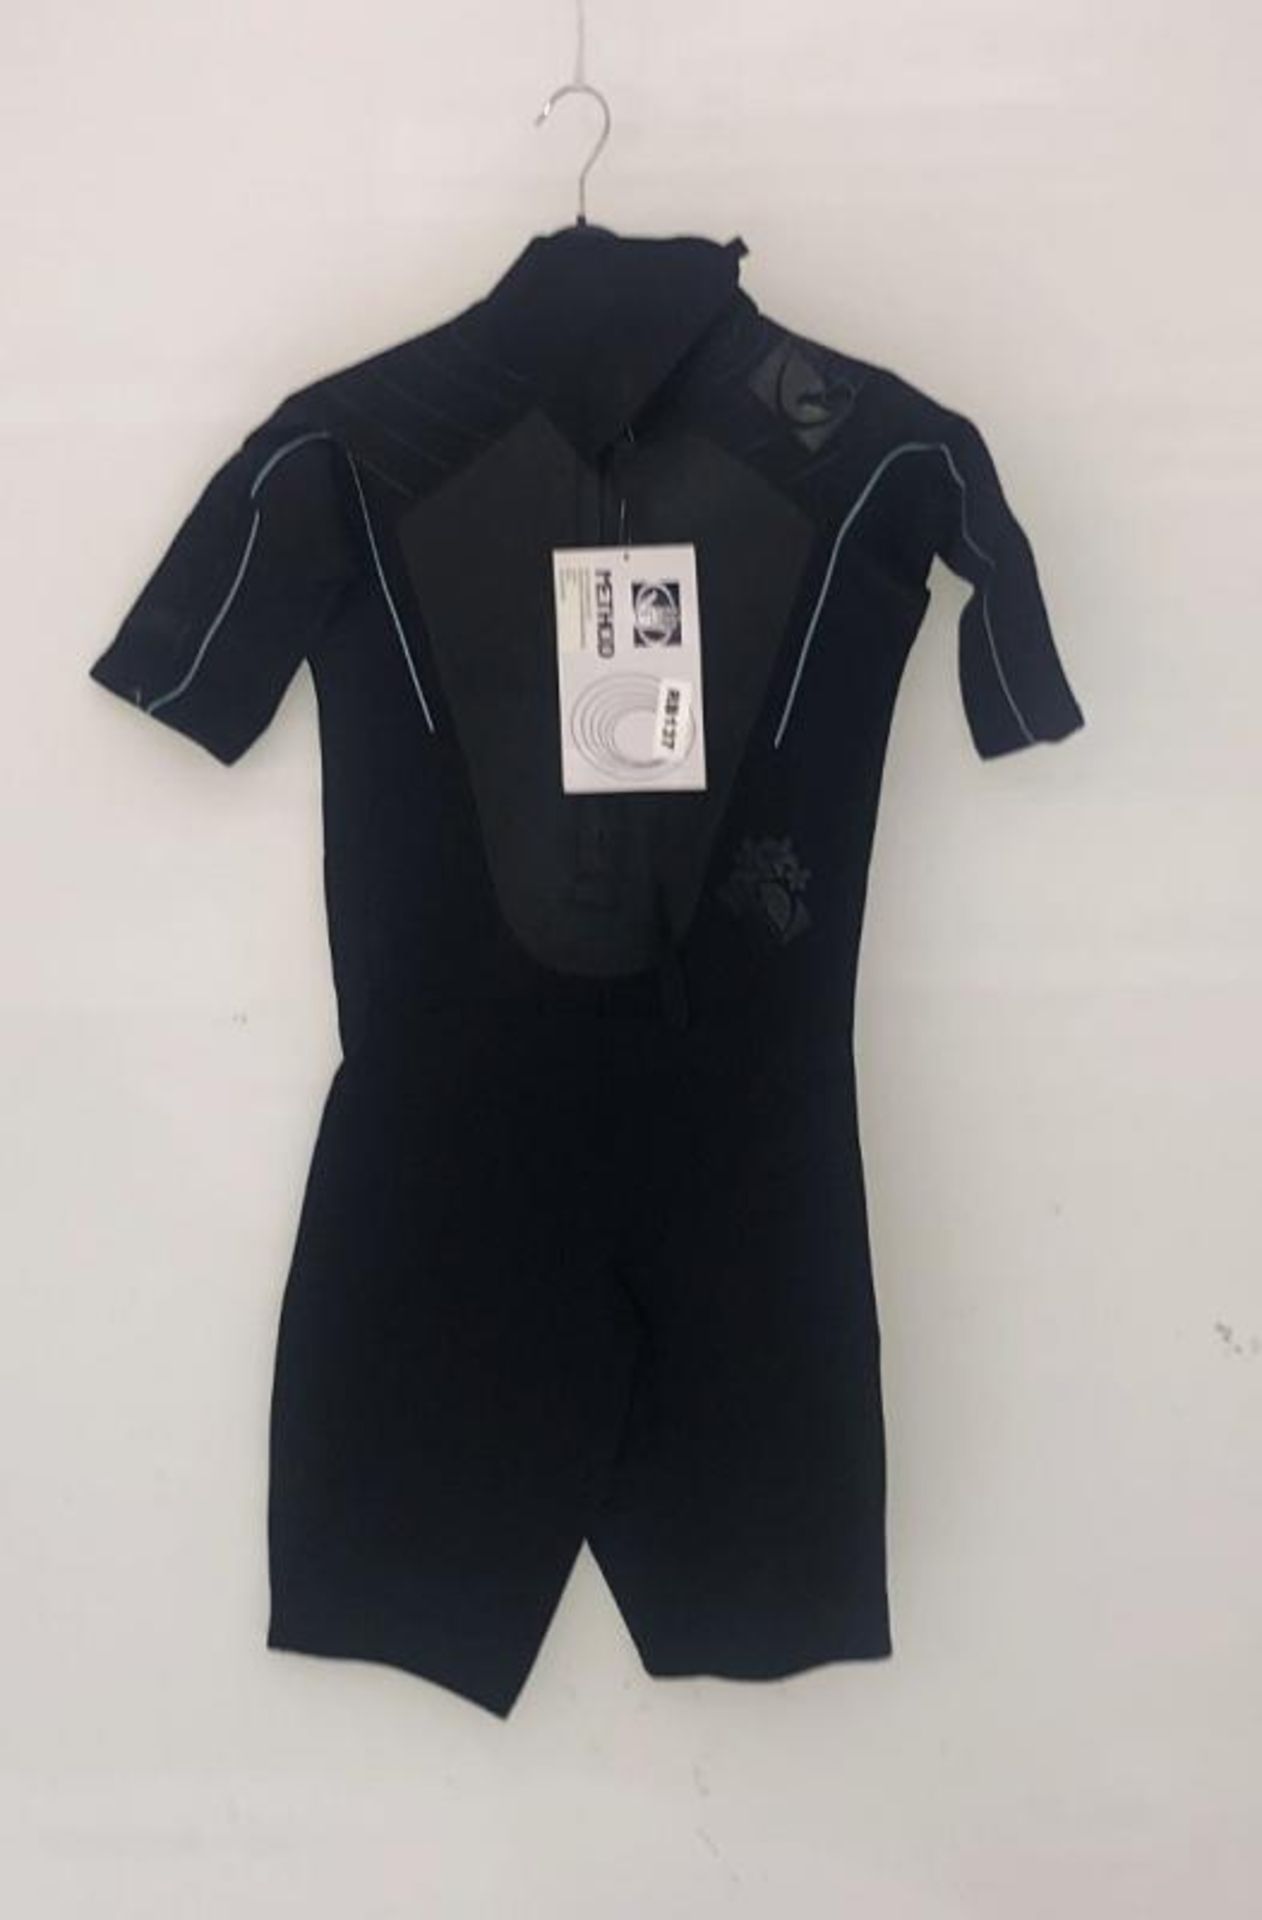 4 x New Body Glove Method Shortie Ladies Wetsuit's - Ref RB136, RB137, RB138, NS485 - CL349 - Altri - Image 16 of 18